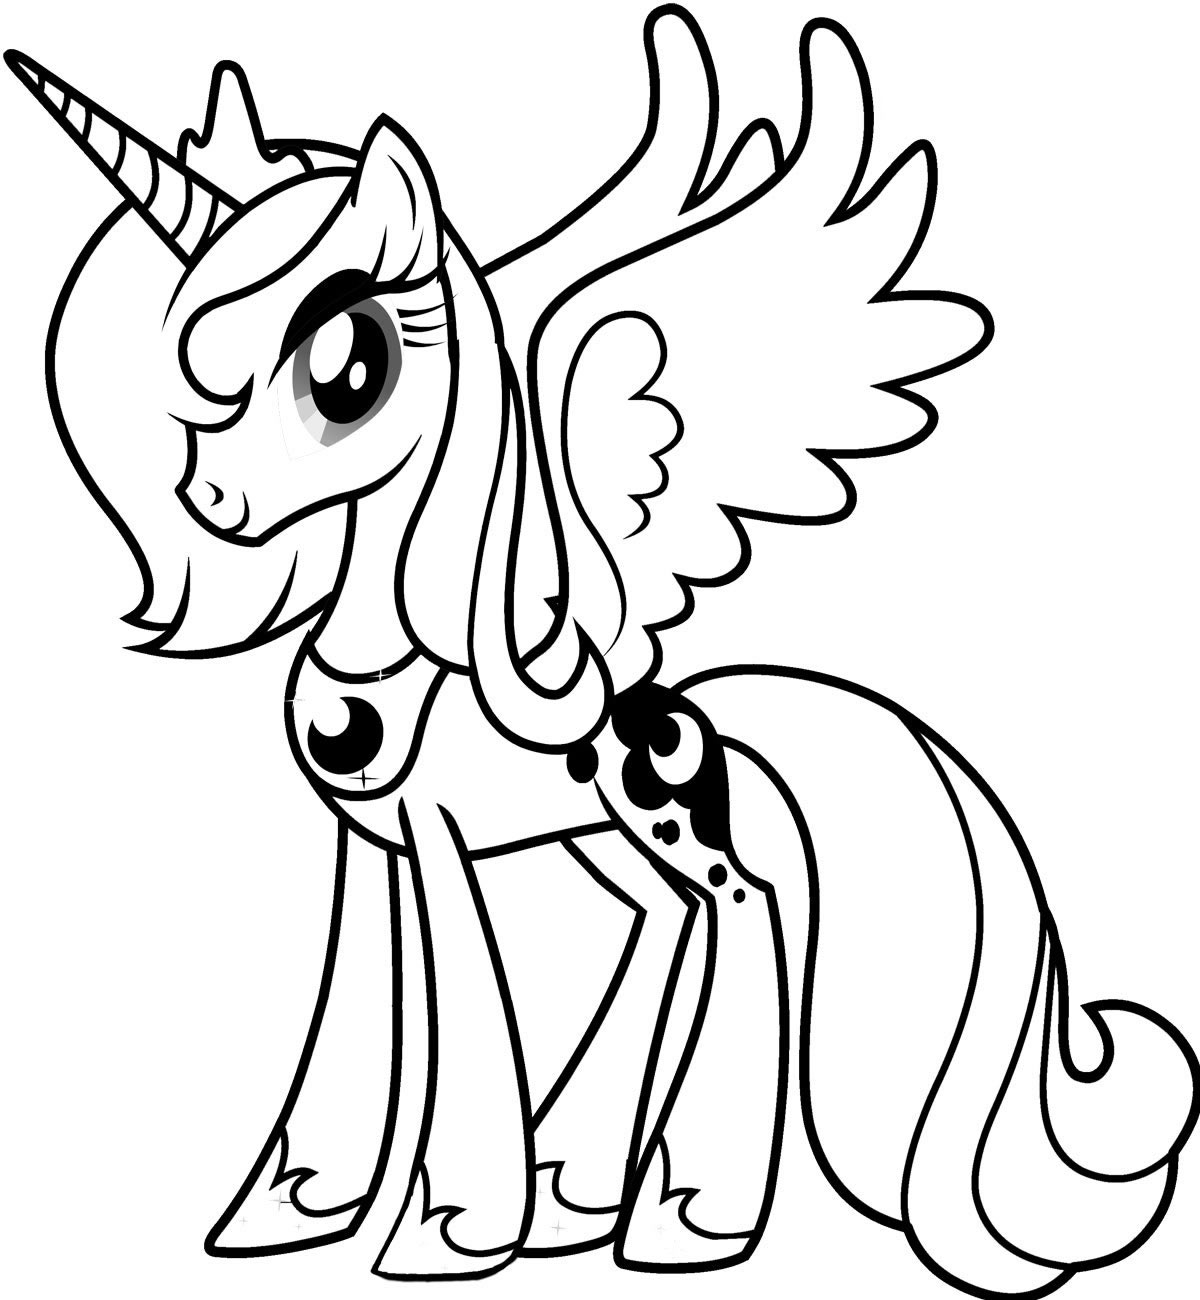 My Little Pony Coloring Page - Dr. Odd